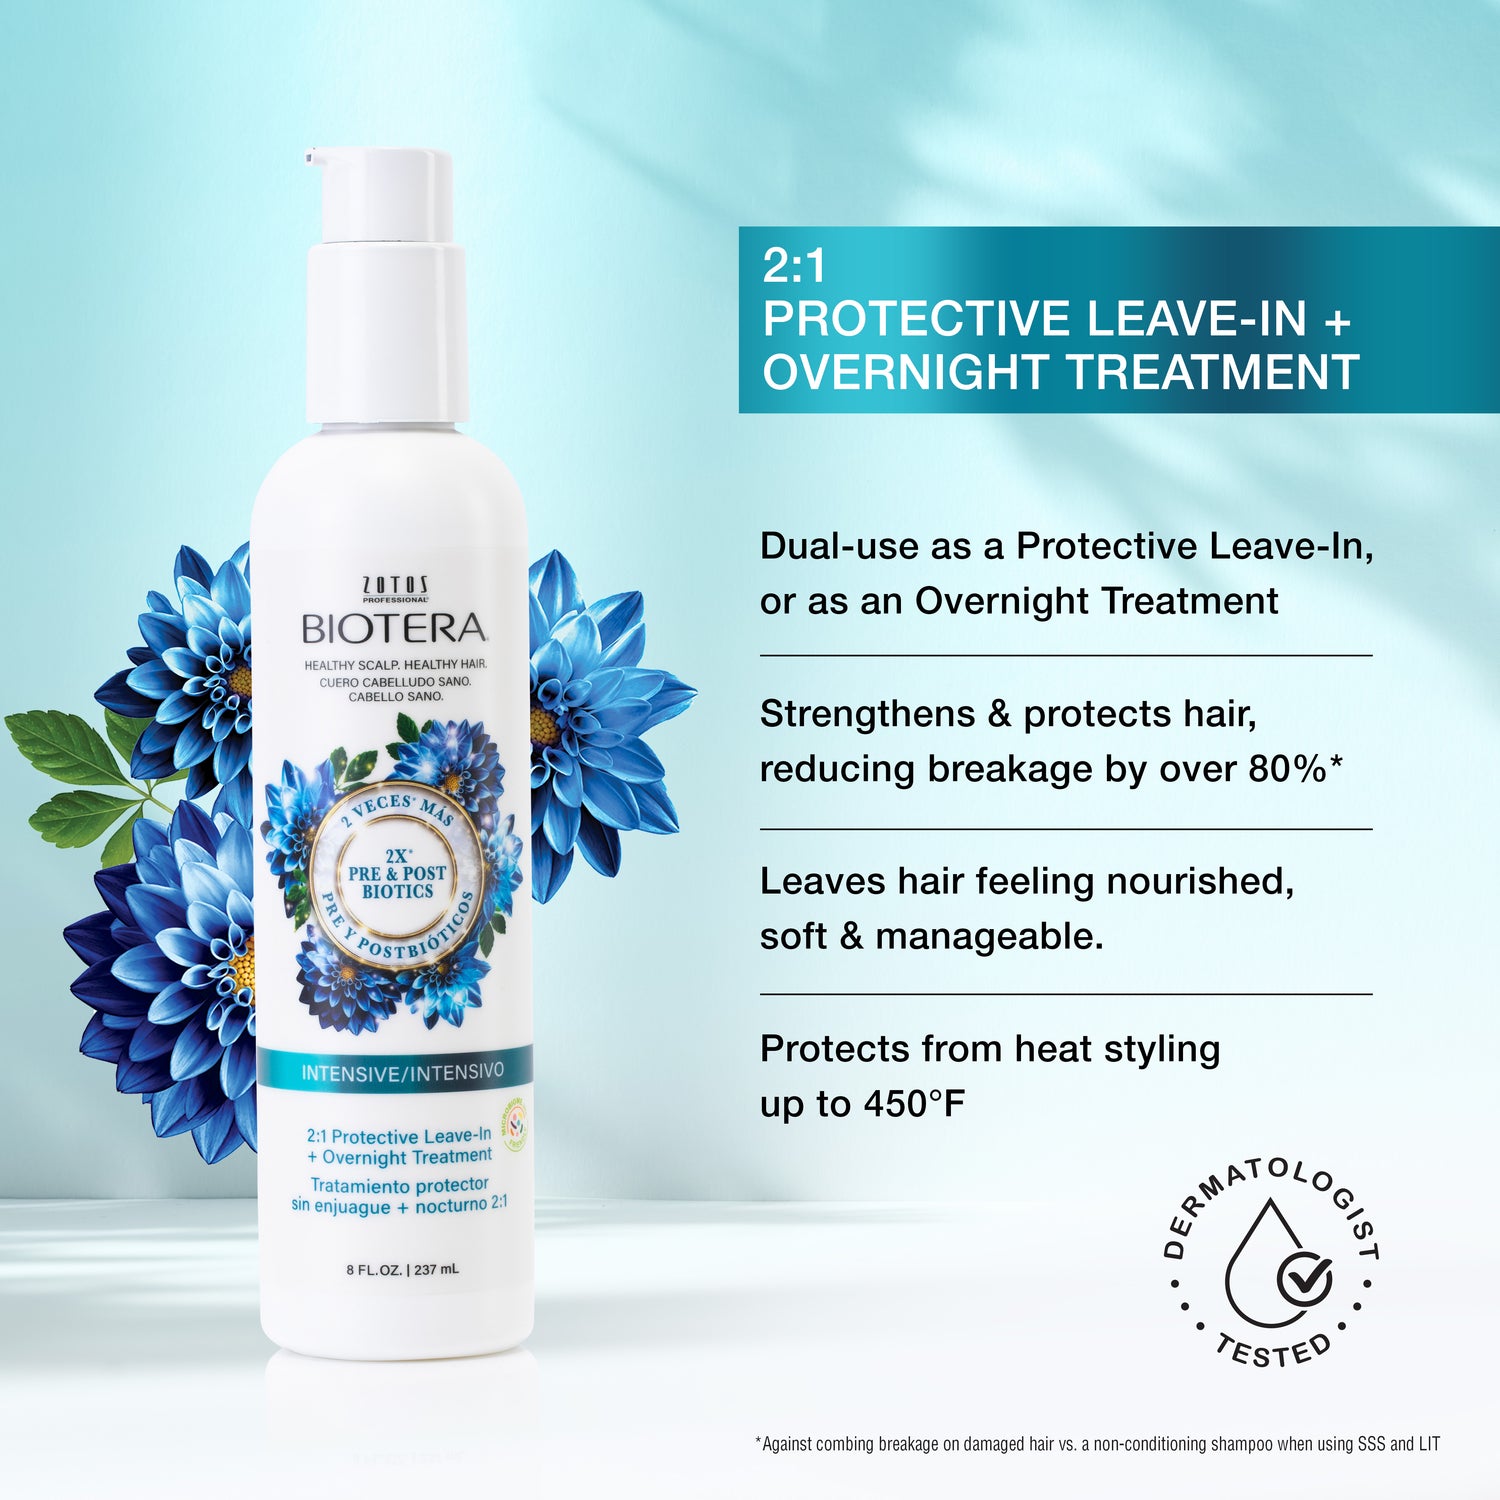 Dual-use as a protective leave-in or as an overnight treatment, strengthens and protects hair, reducing breakage by over 80% (against combing breakage on damage hair vs. a non-conditioning shampoo when using SSS and LIT). Leaves hair feeling nourished, soft and manageable. Protects from heat styling up to 45 degrees Fahrenheit. Dermatologist tested.  